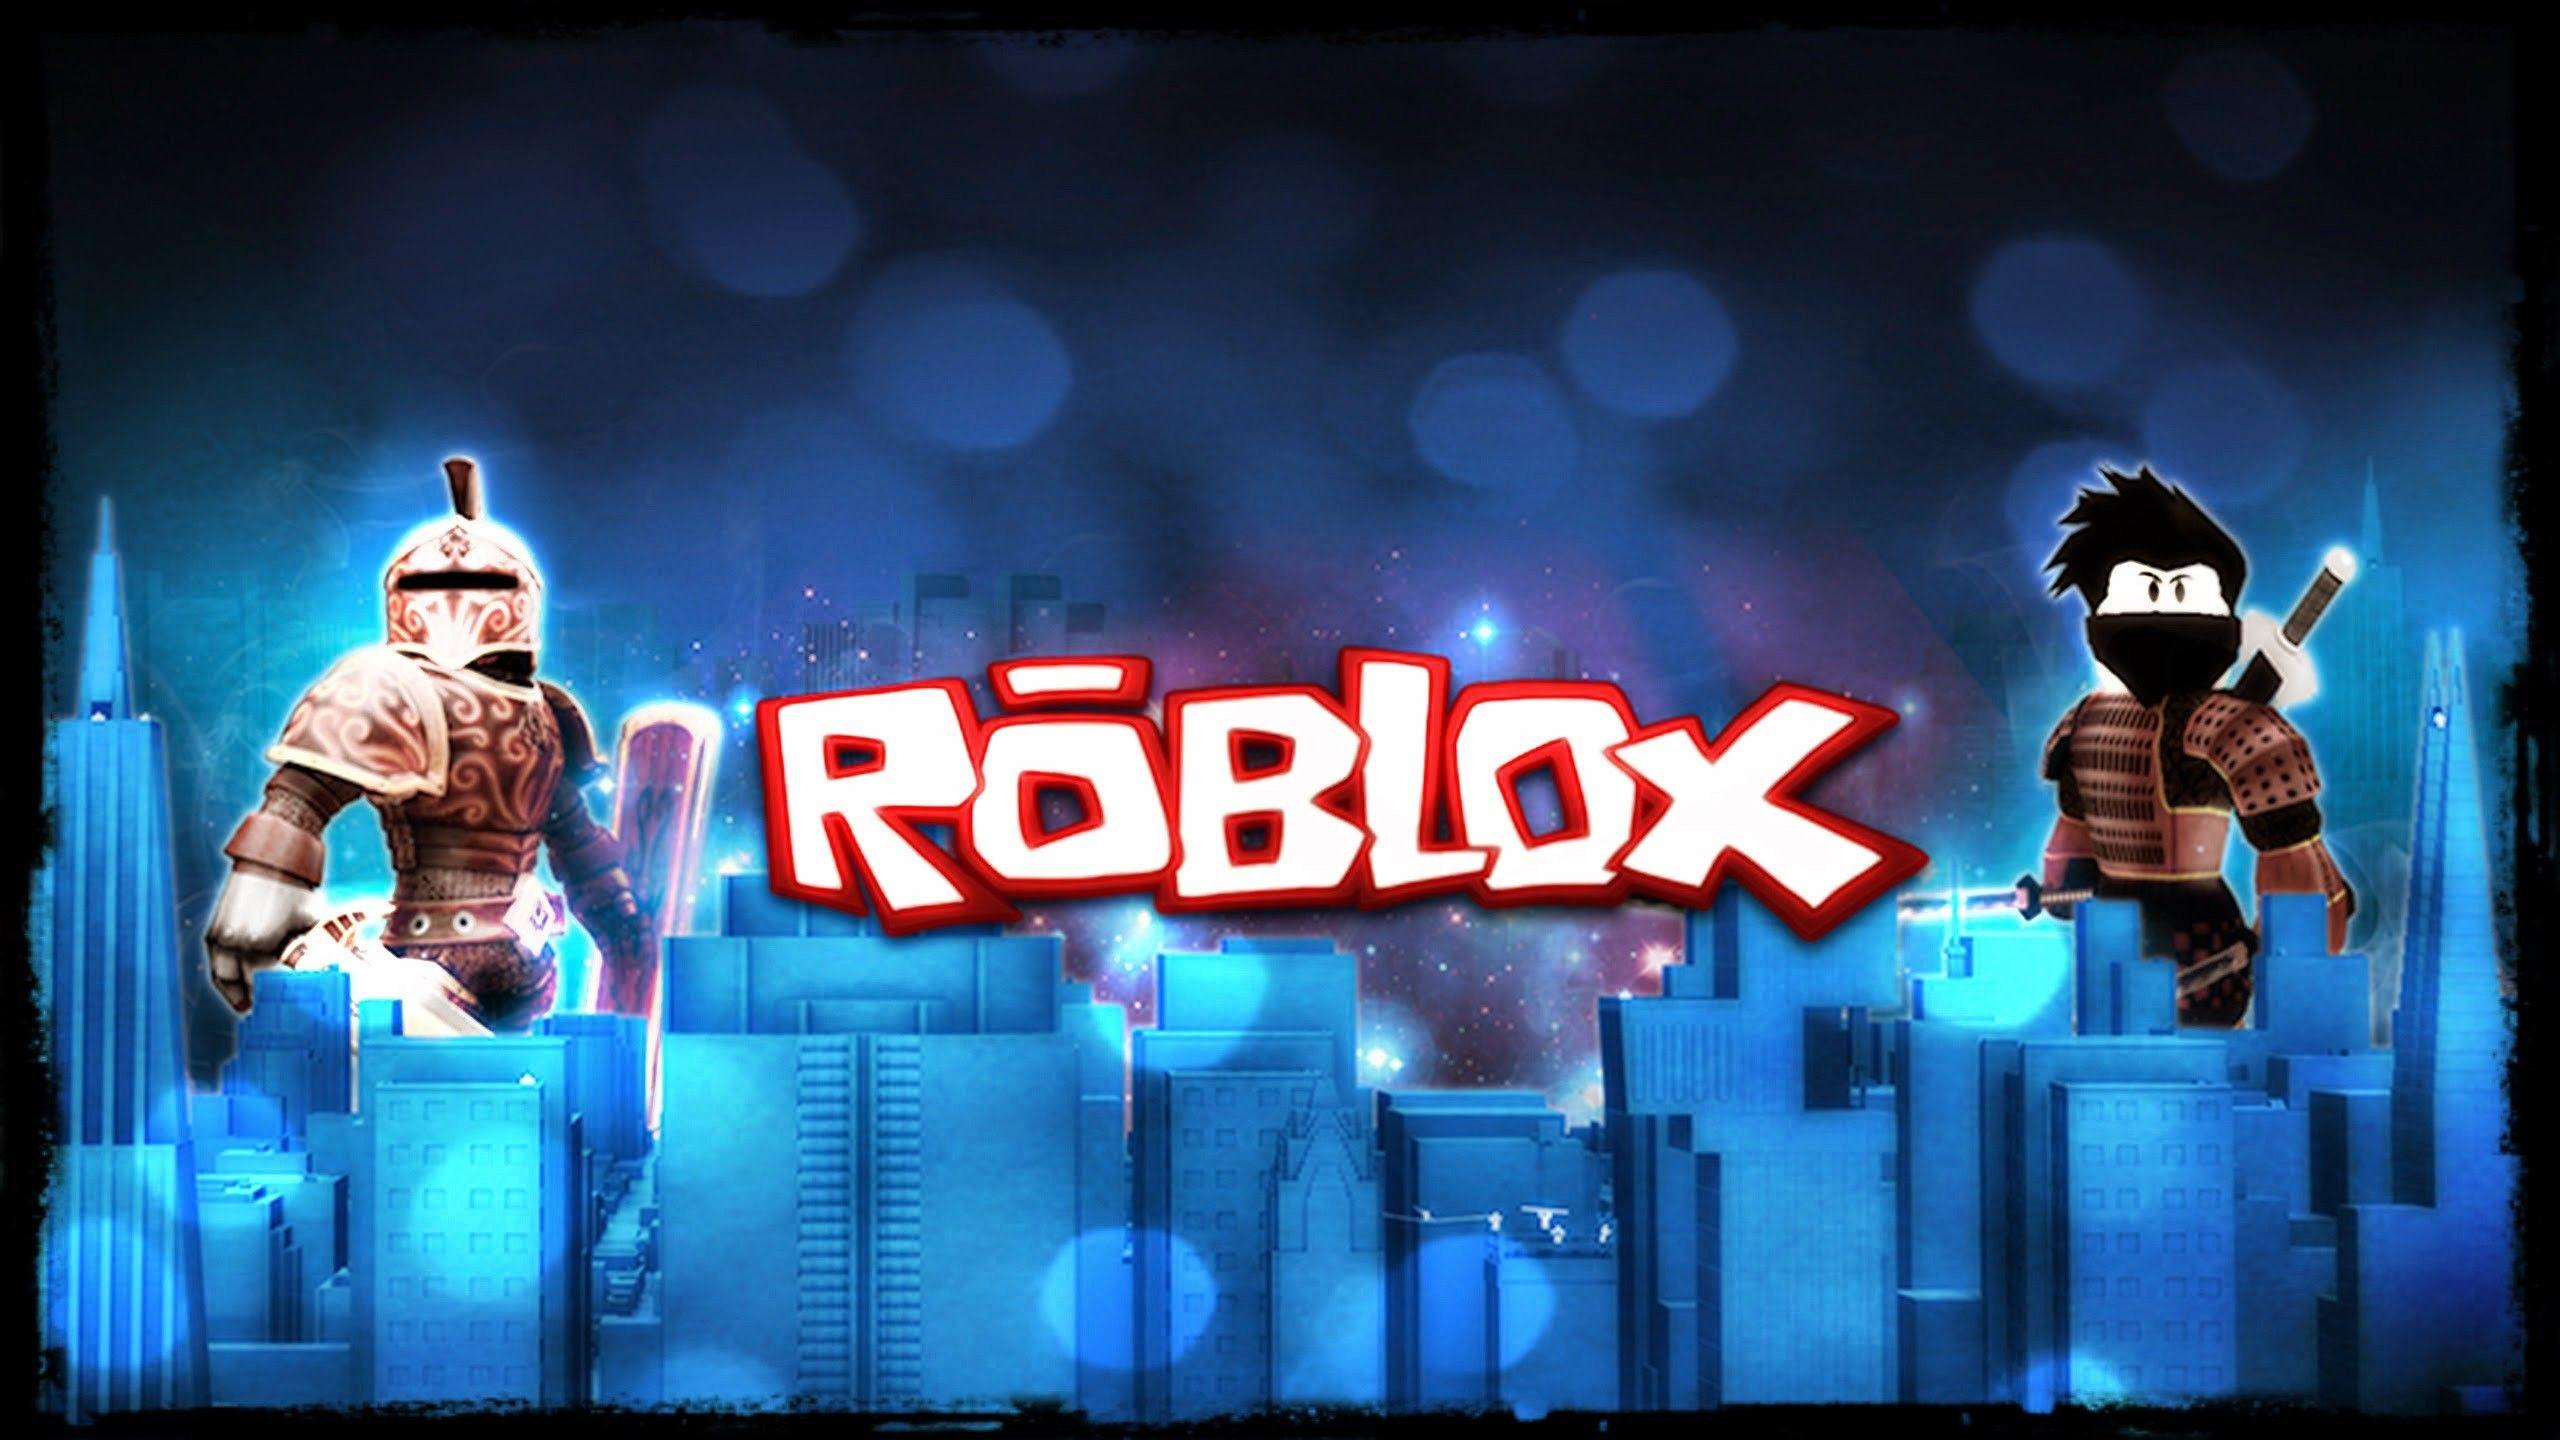 Robux Logo Hd - this logo means fun and free every body is welcome to roblox and has its own personality follow me on roblox hetmaster123 roblox roblox memes roblox roblox